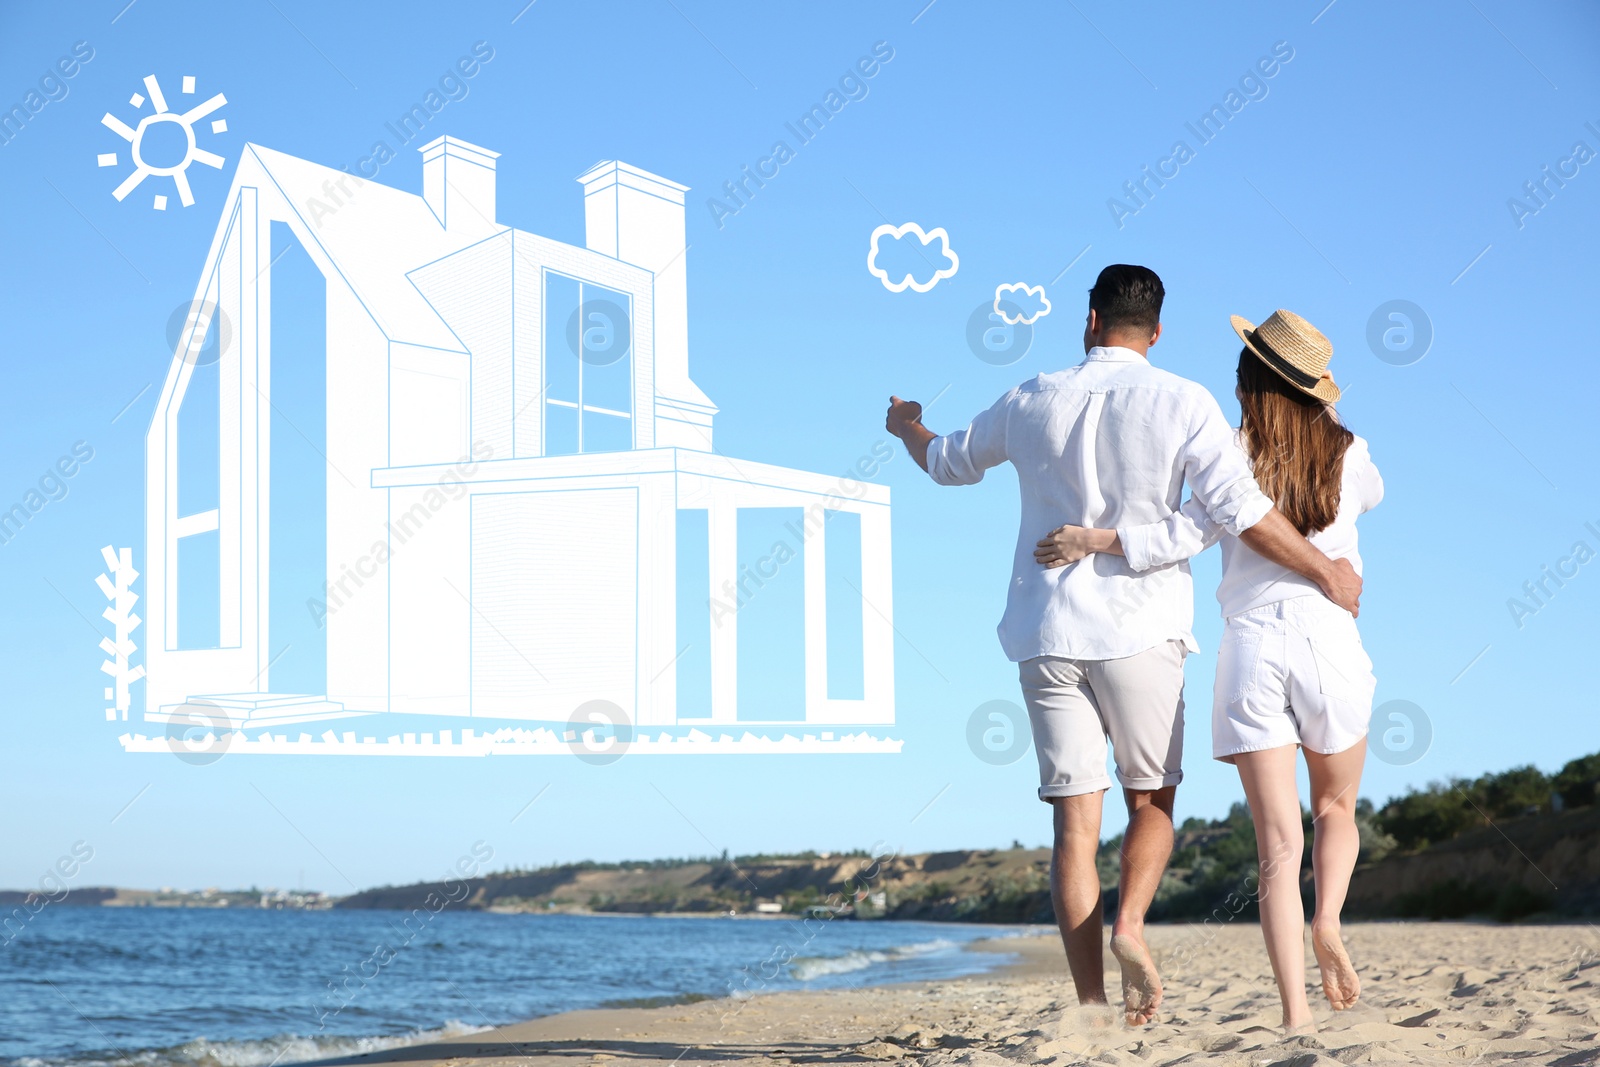 Image of Couple imagining dream house outdoors. Illustration of building